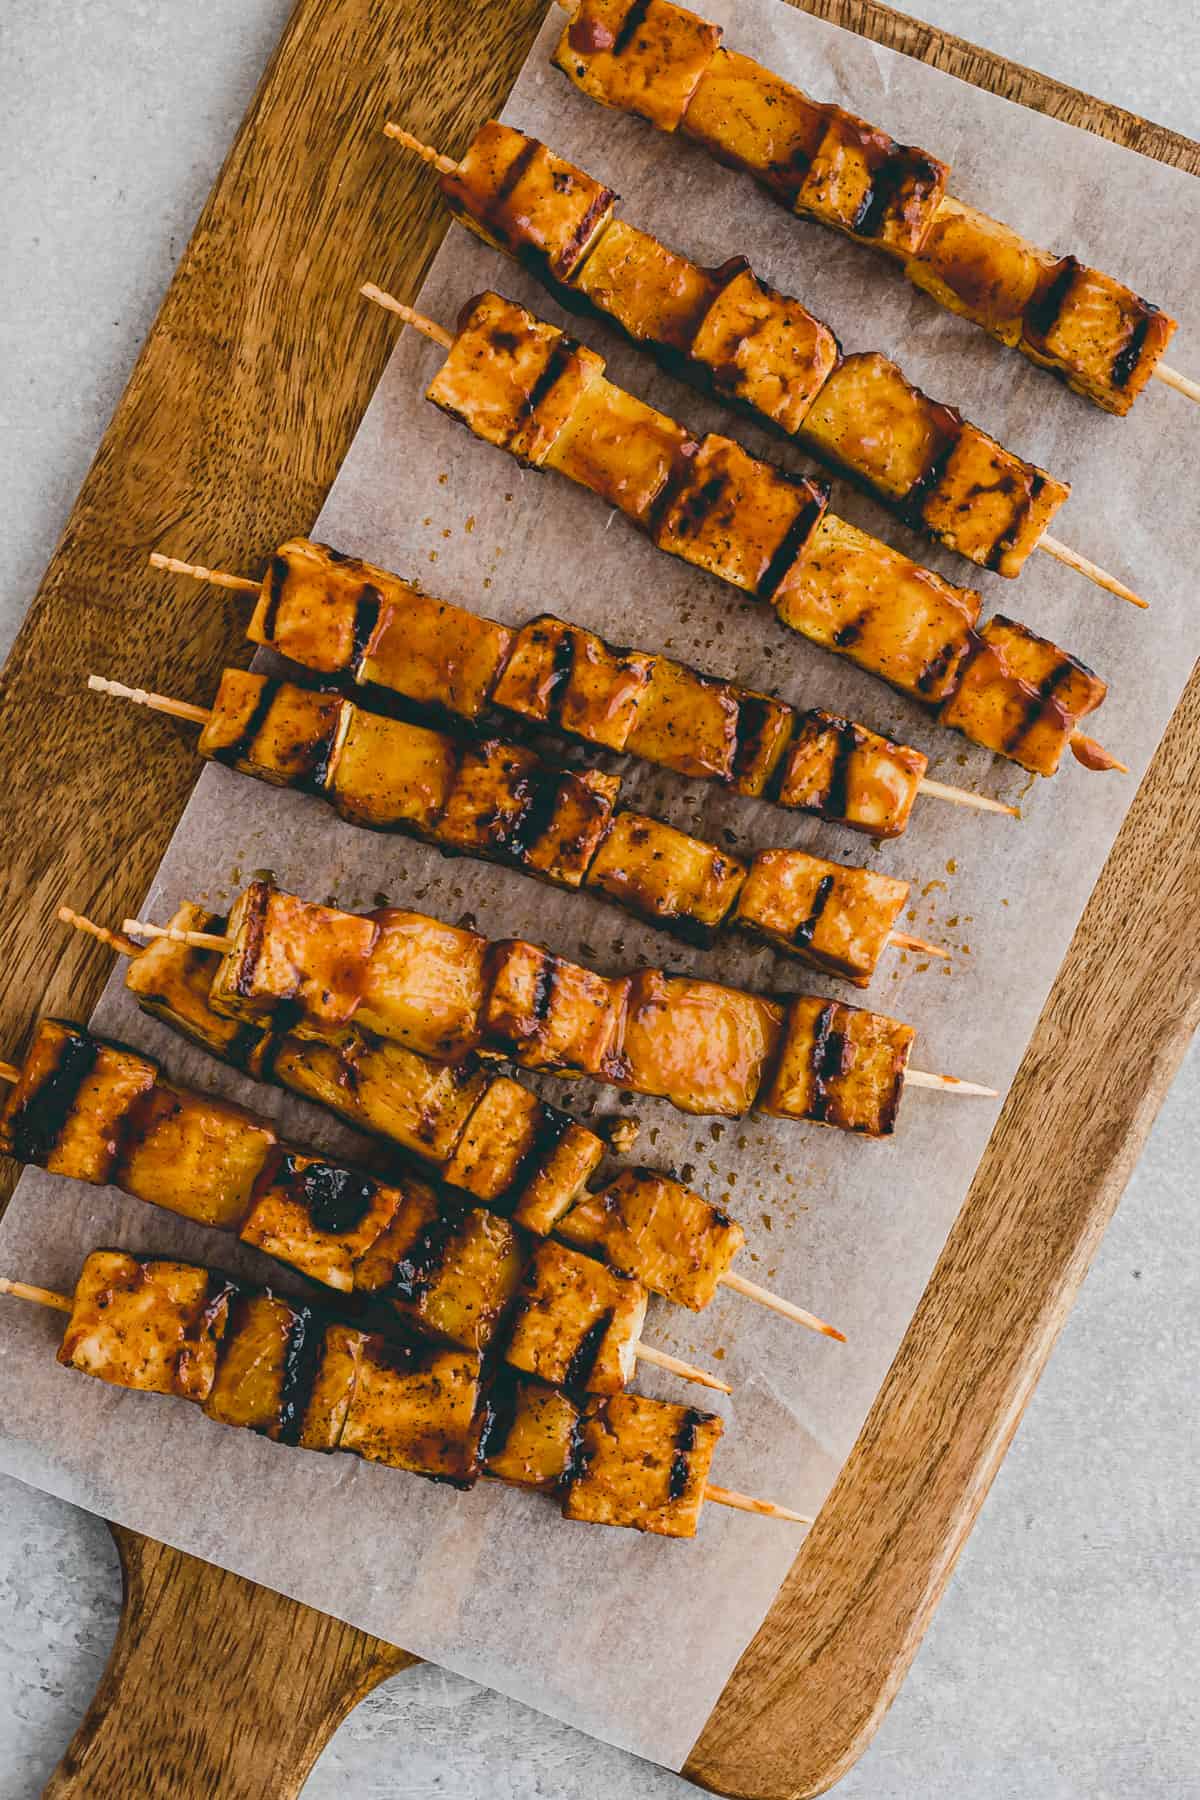 Top view of grilled BBQ tofu skewers on a wooden chopping board.